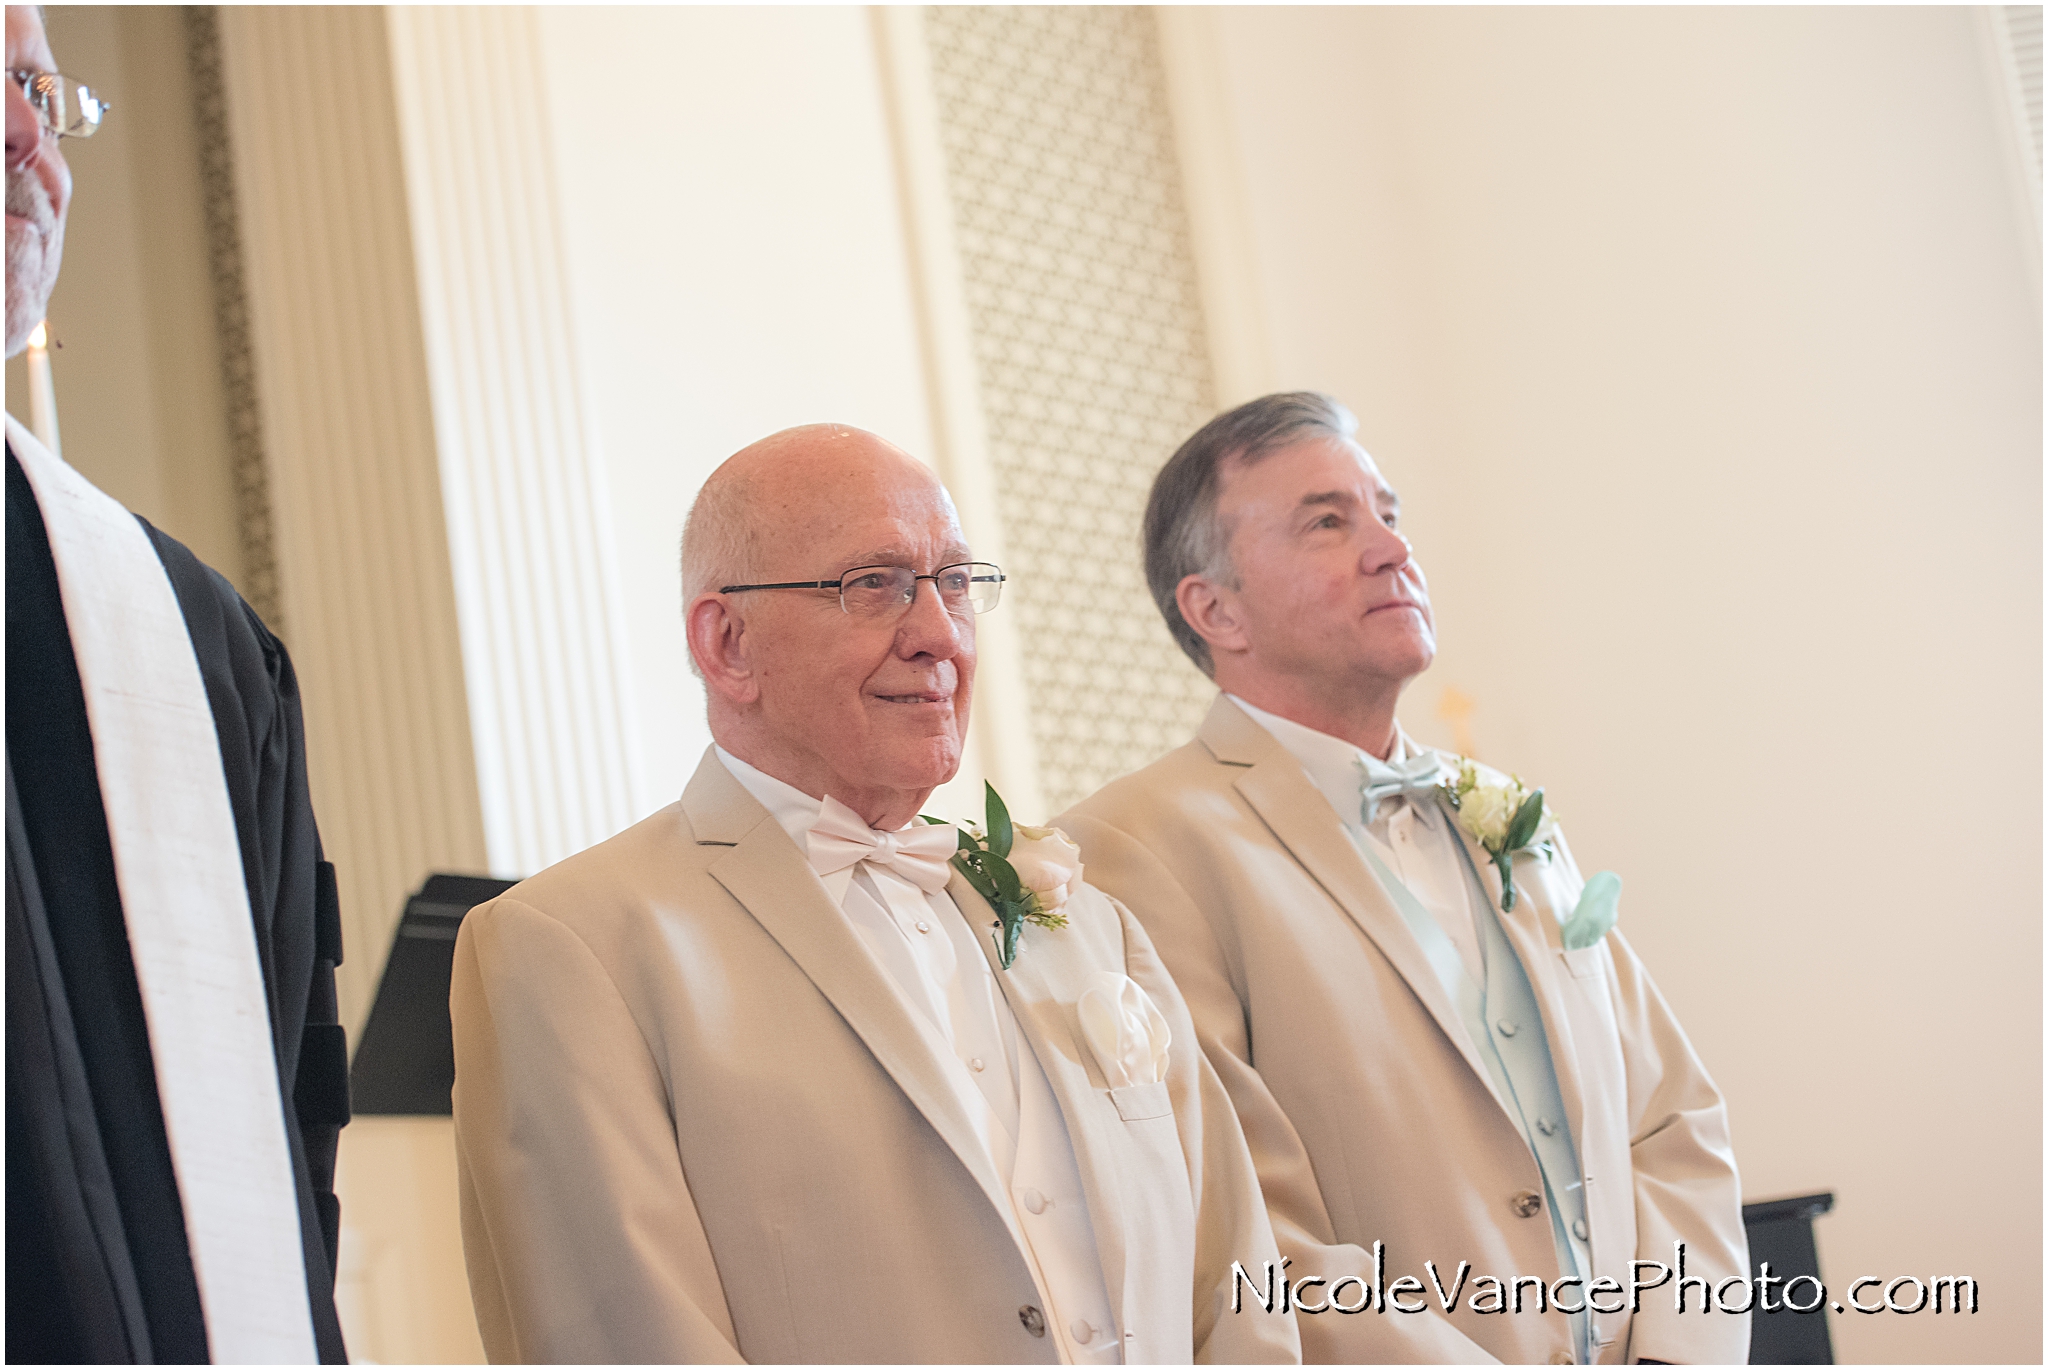 The groom sees his bride for the first time at Crestwood Presbyterian Church in Chesterfield VA.